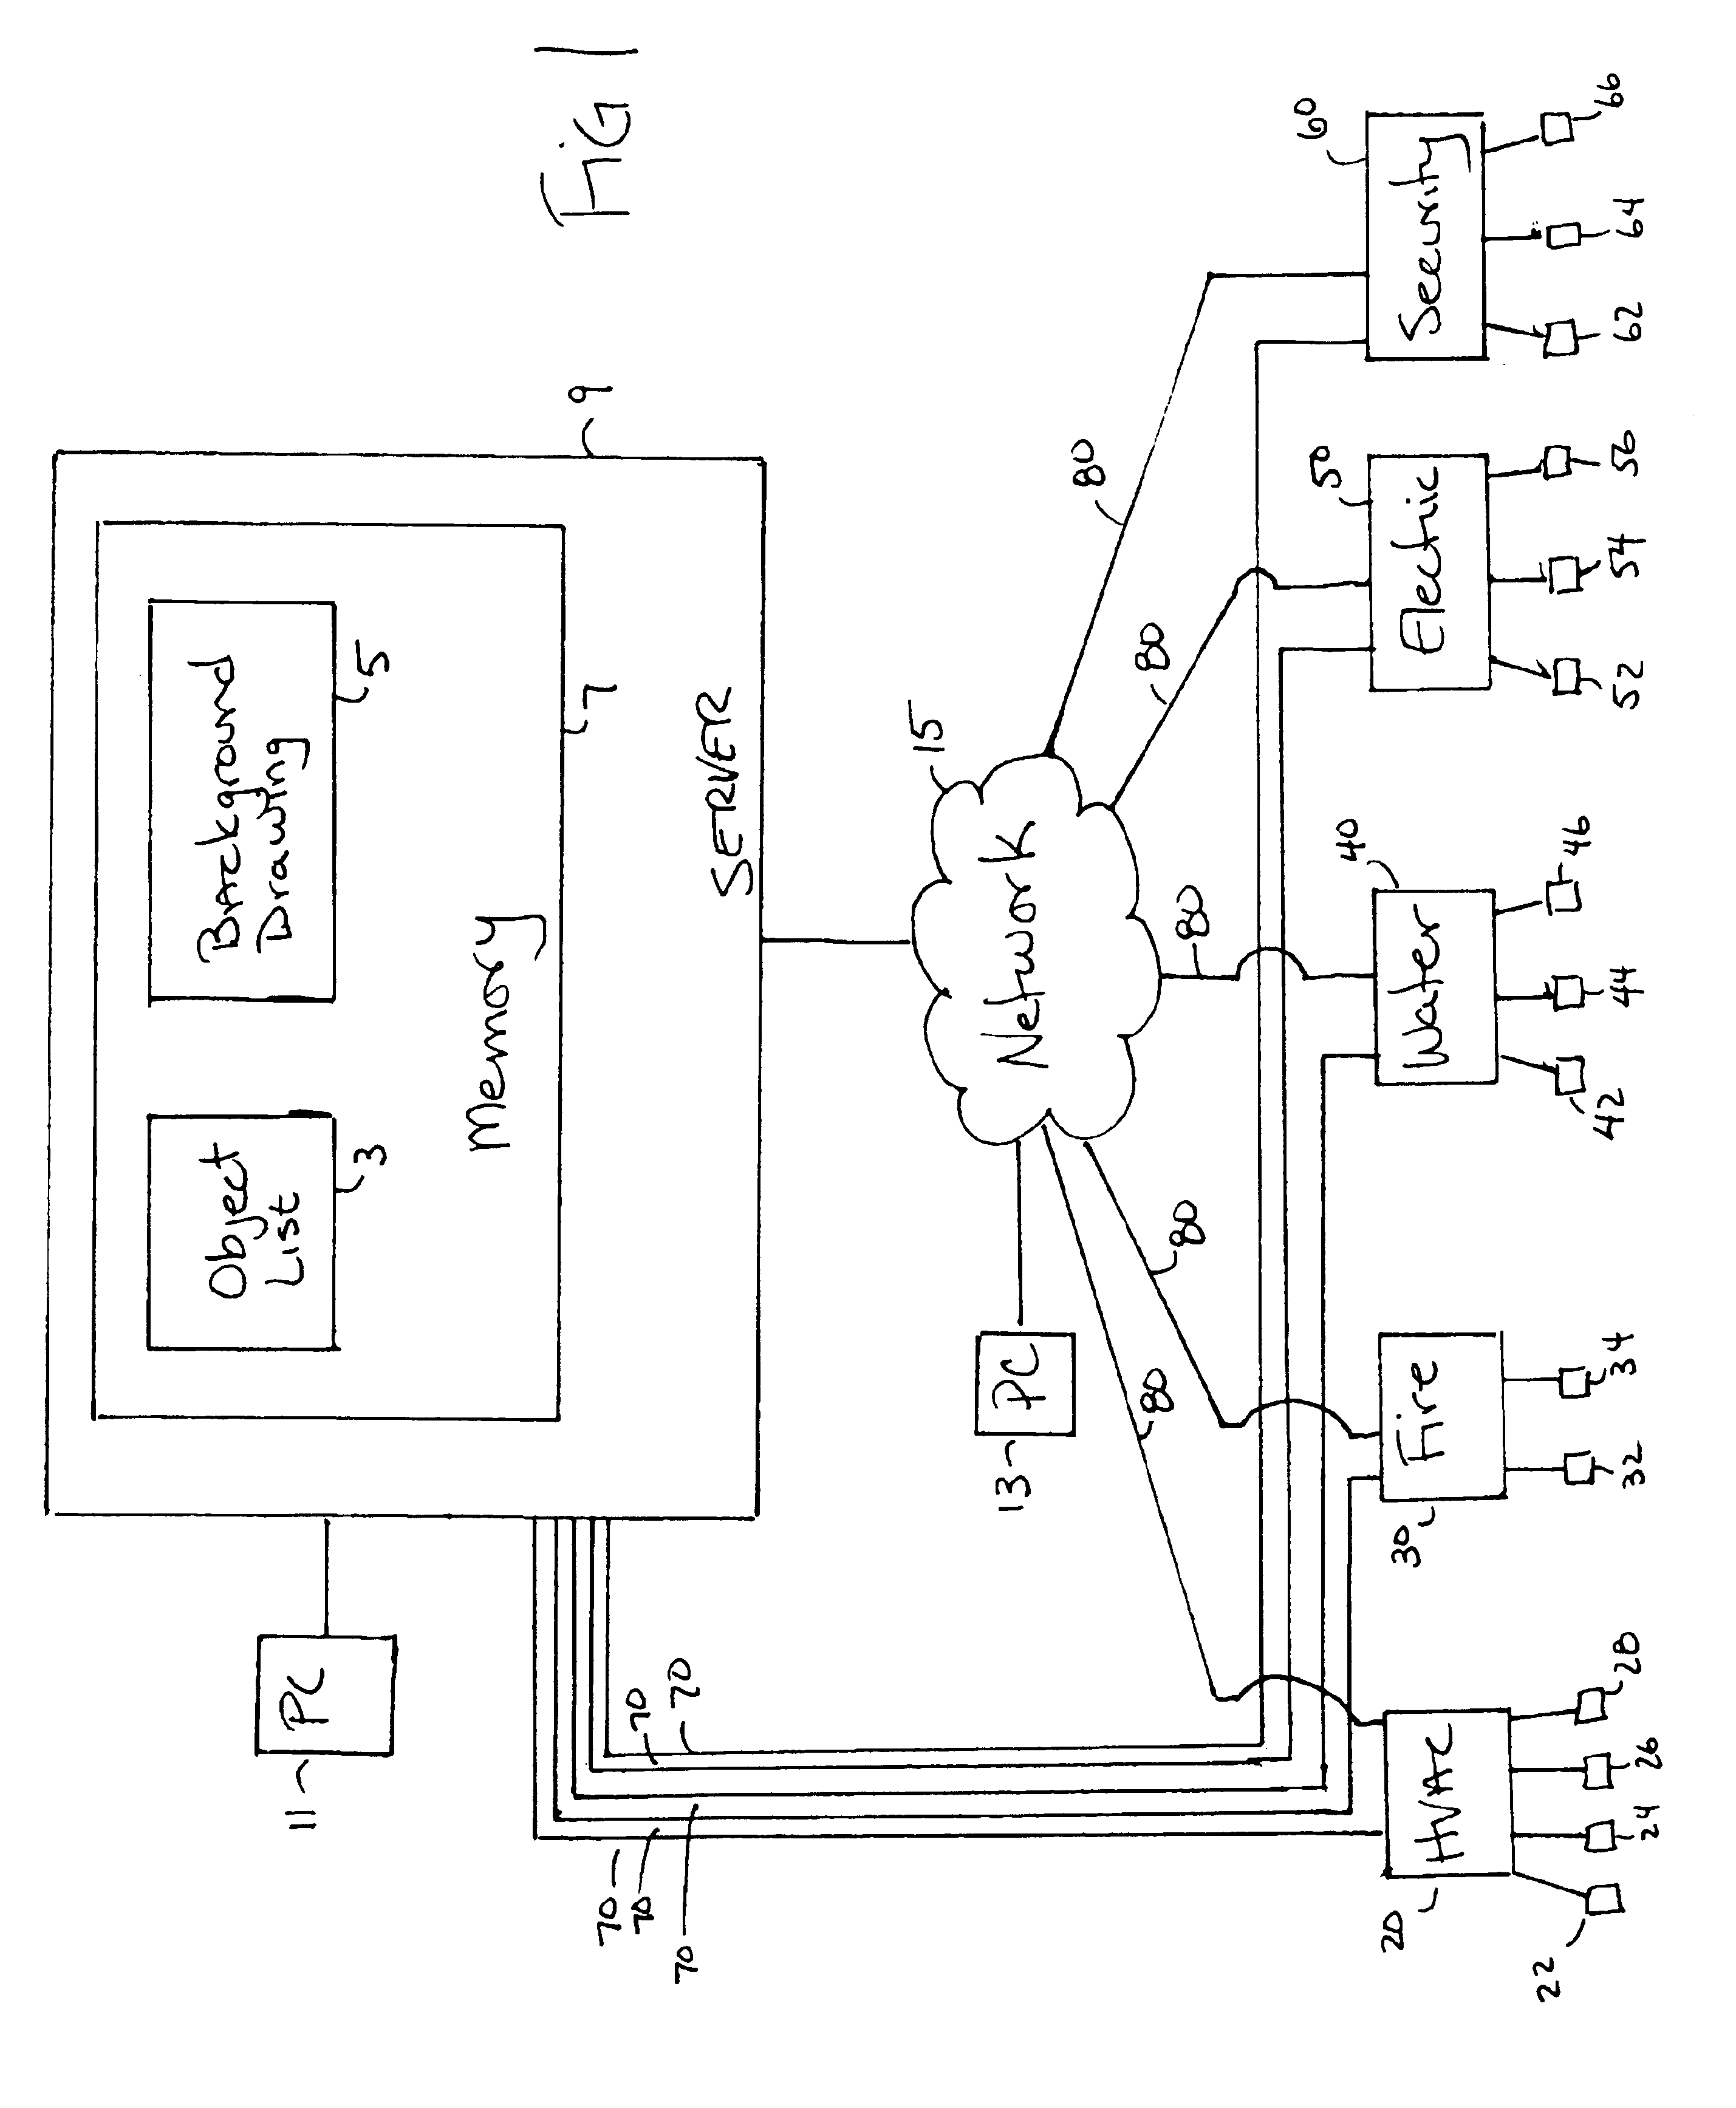 Method and apparatus for automatically generating a SCADA system